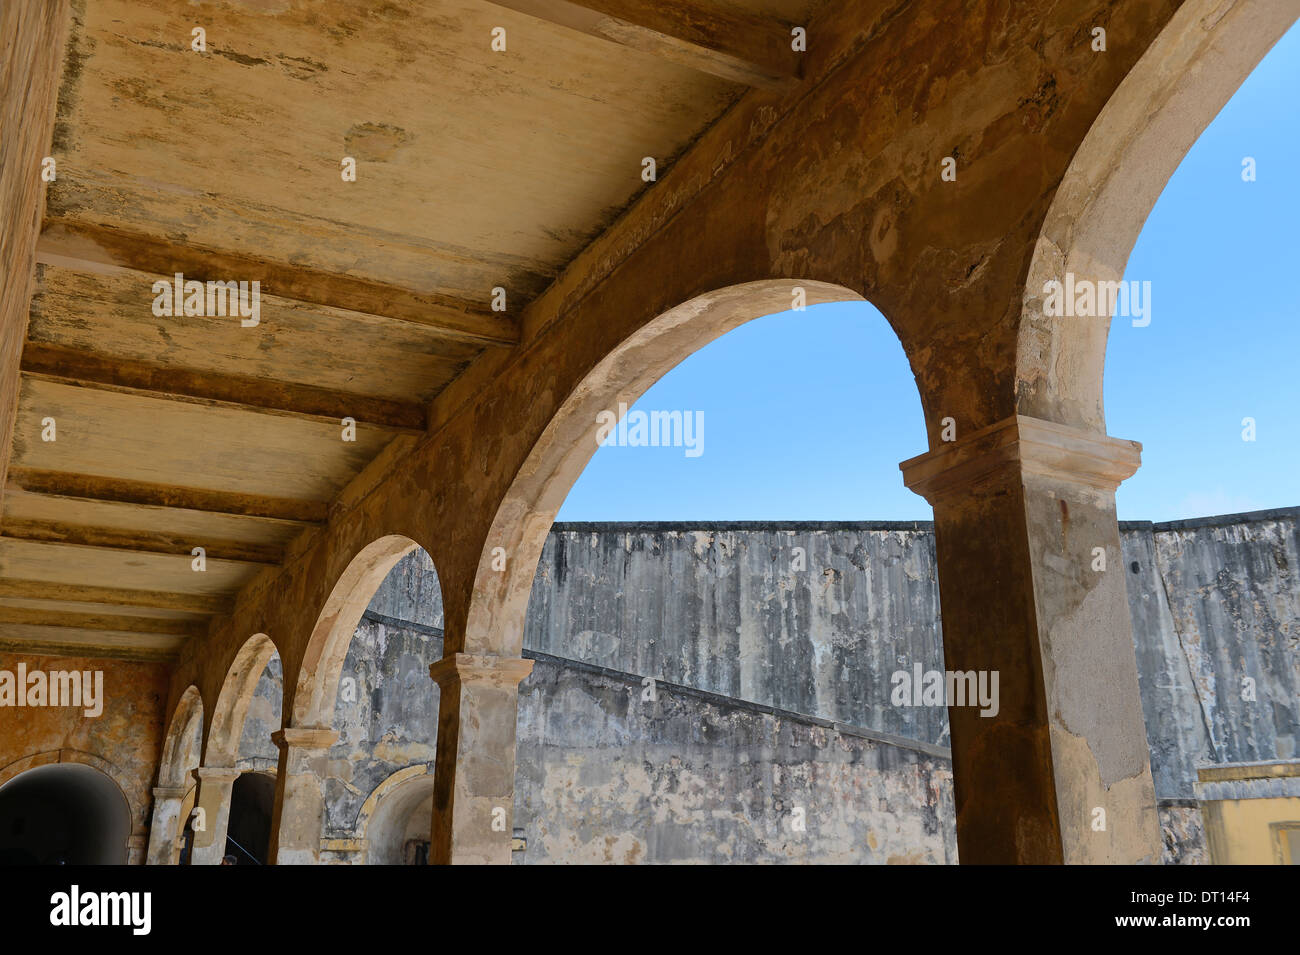 Architectural arches at San Cristobal fort in San Juan Puerto Rico Stock Photo